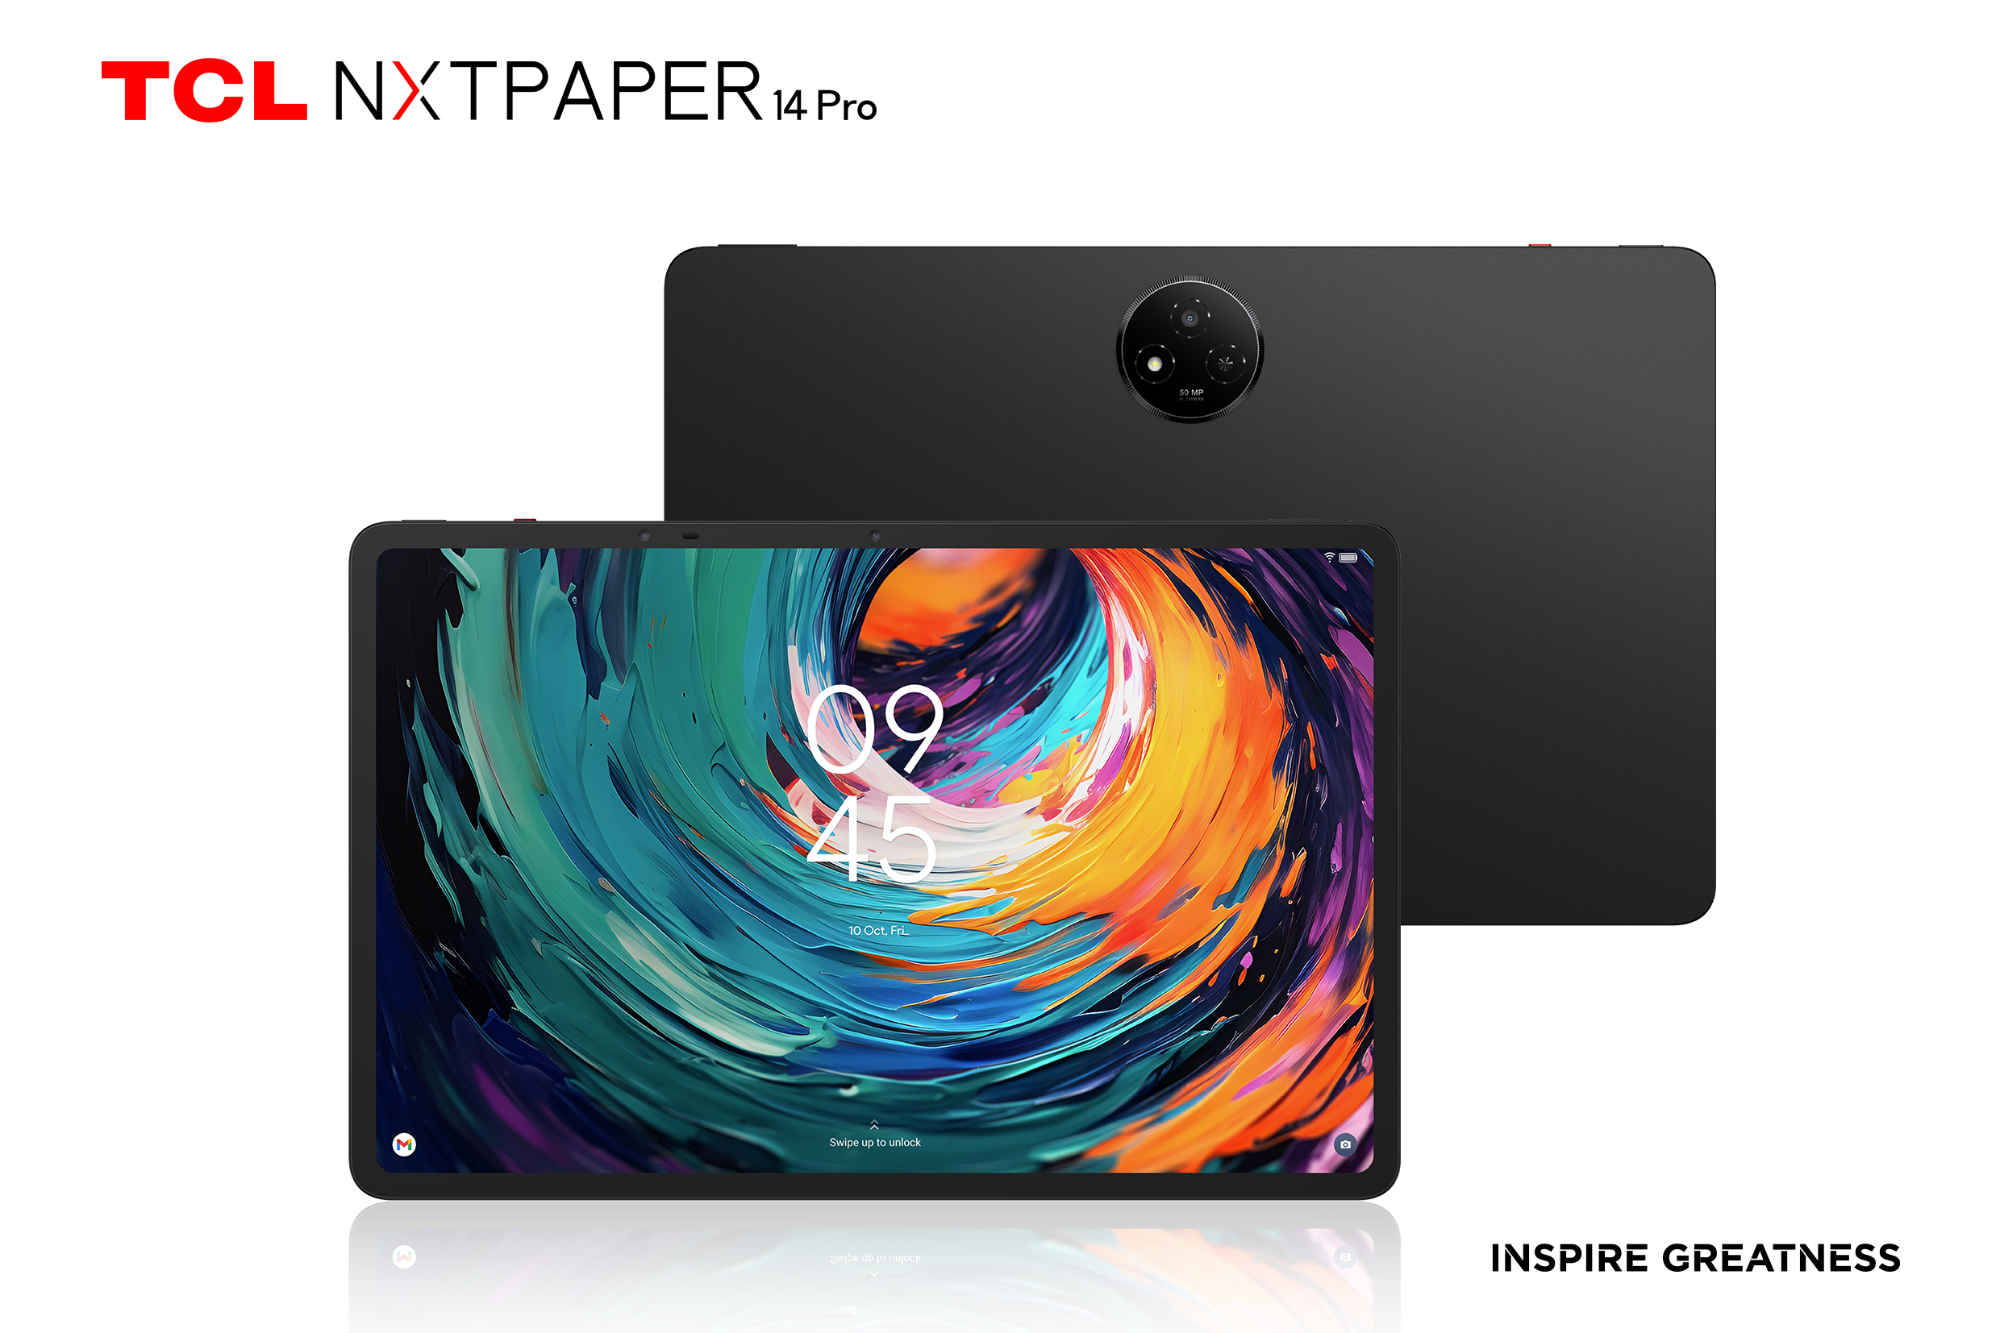 A render of the TCL NXTPAPER 14 Pro Android tablet.